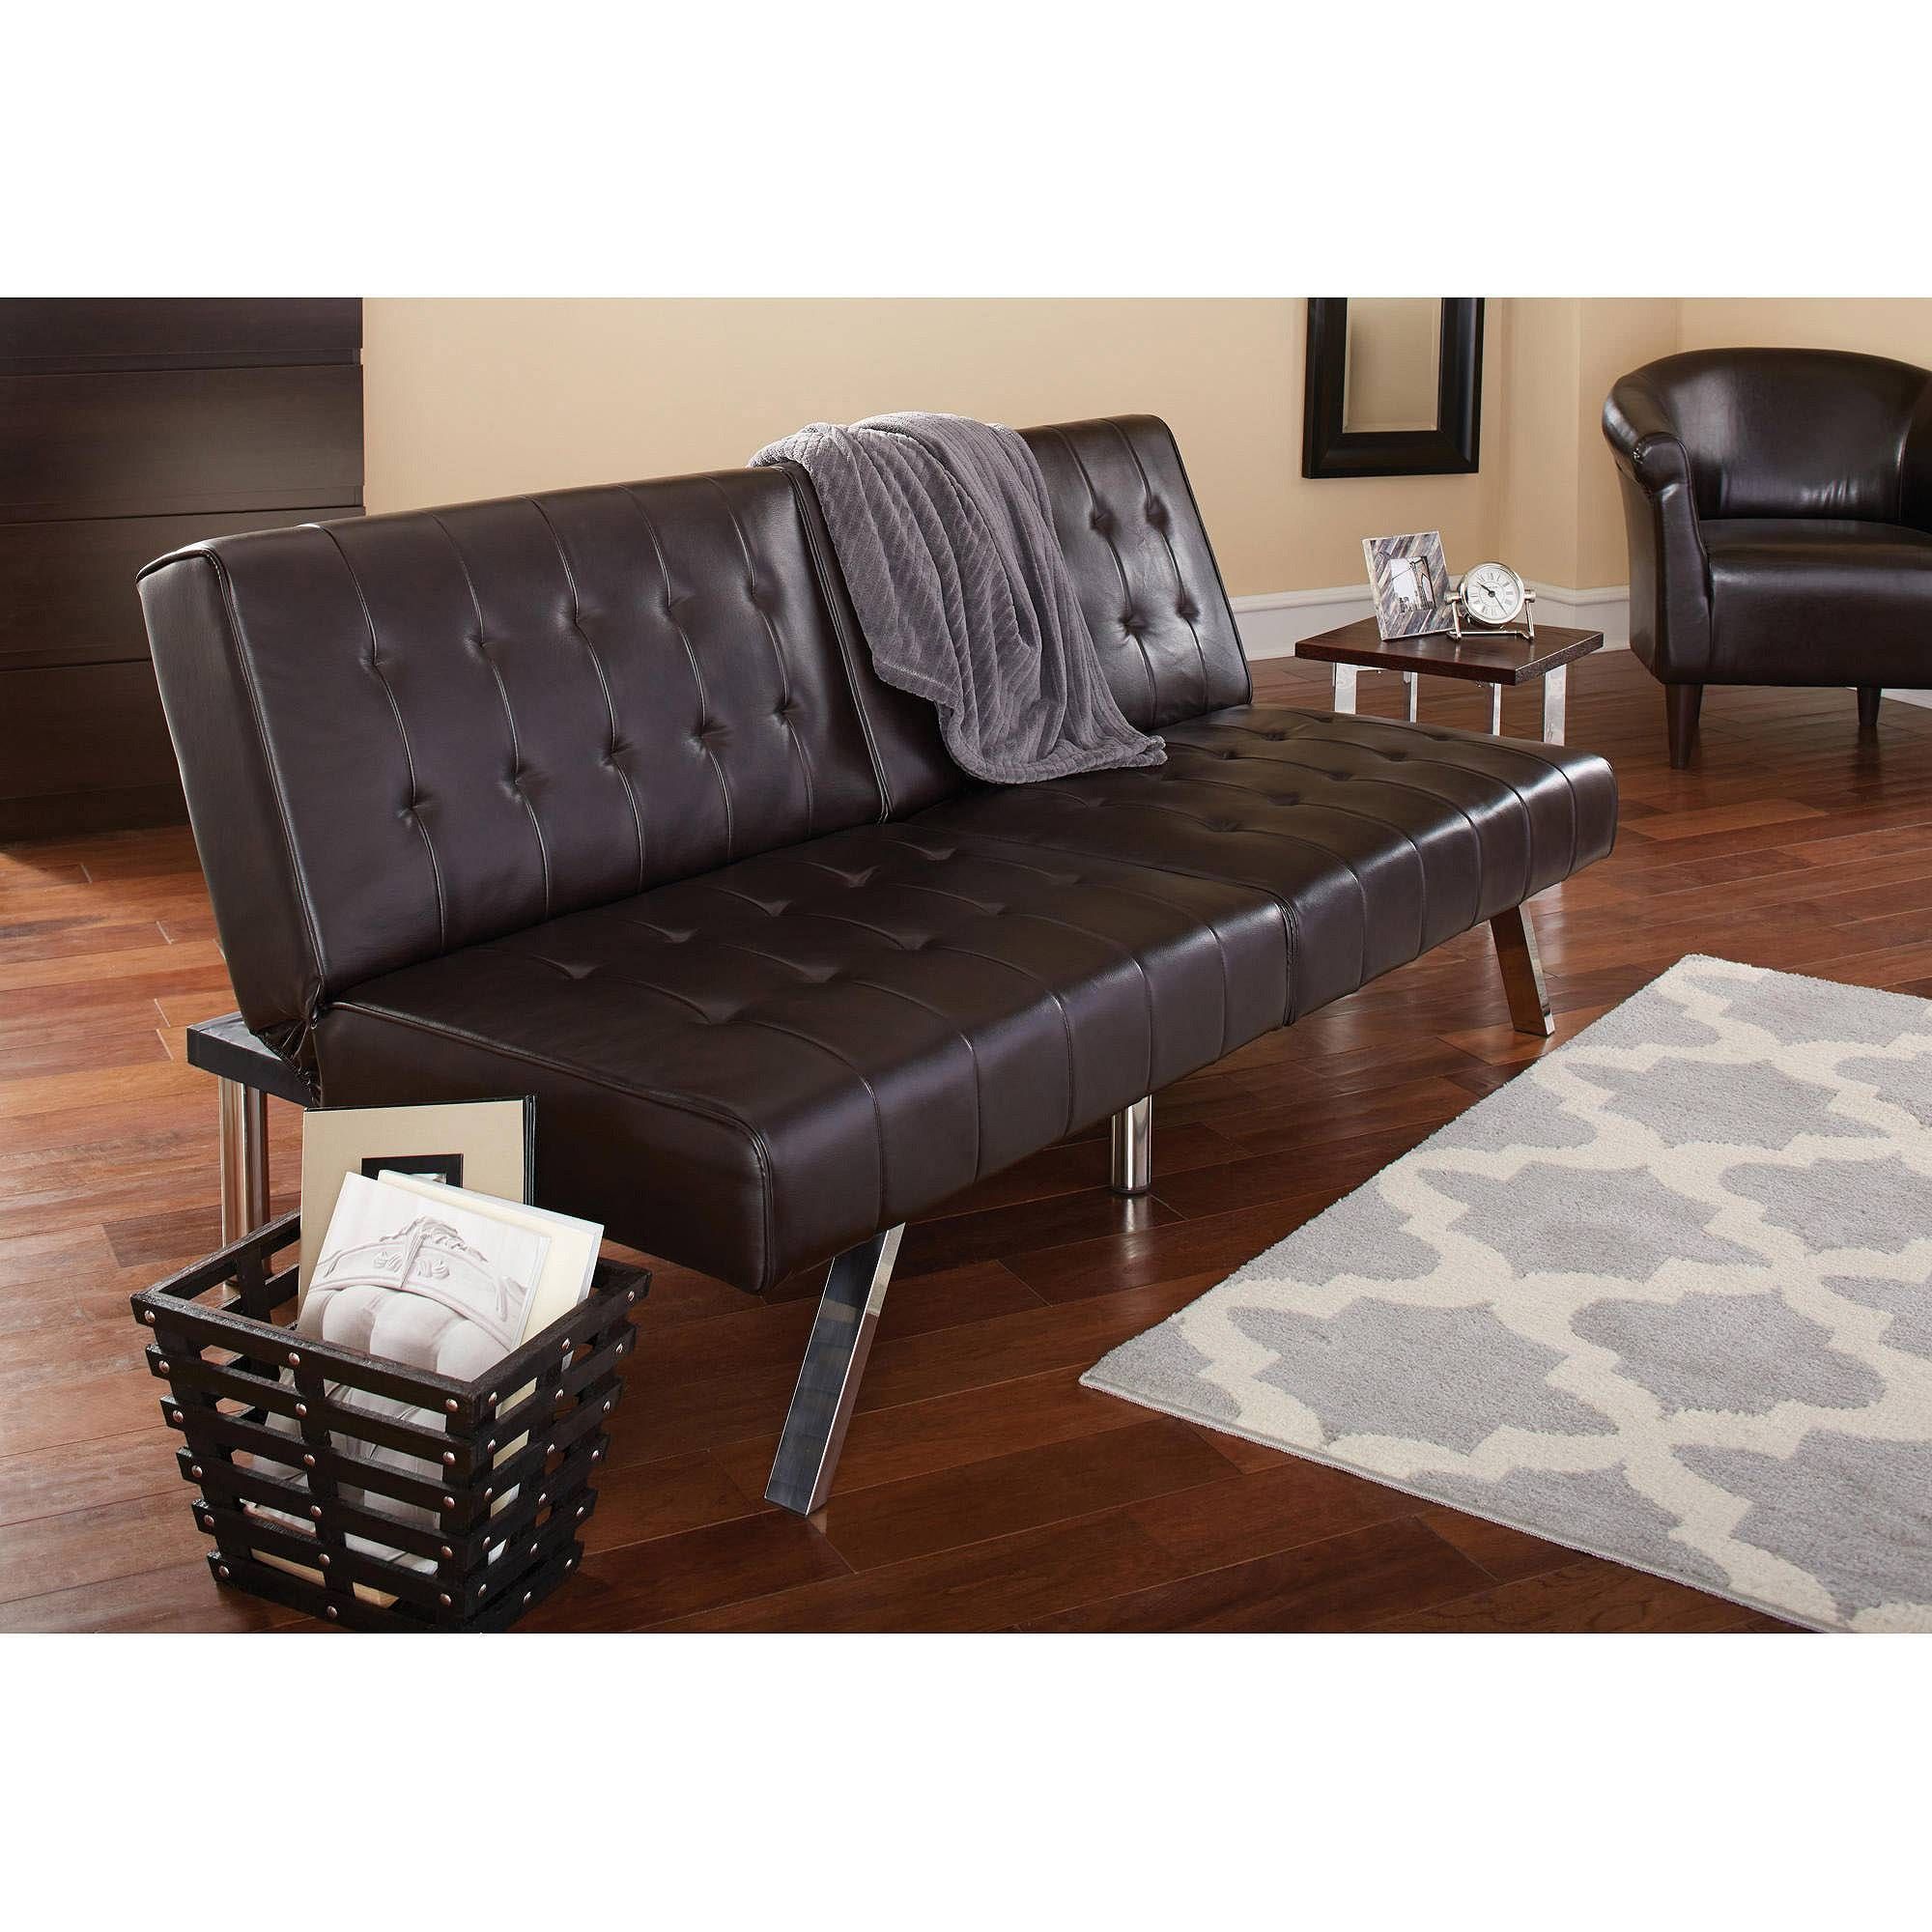 Barcelona Convertible Futon Sofa Bed And Lounger With Pillows Throughout Wallmart Sofa (View 5 of 25)